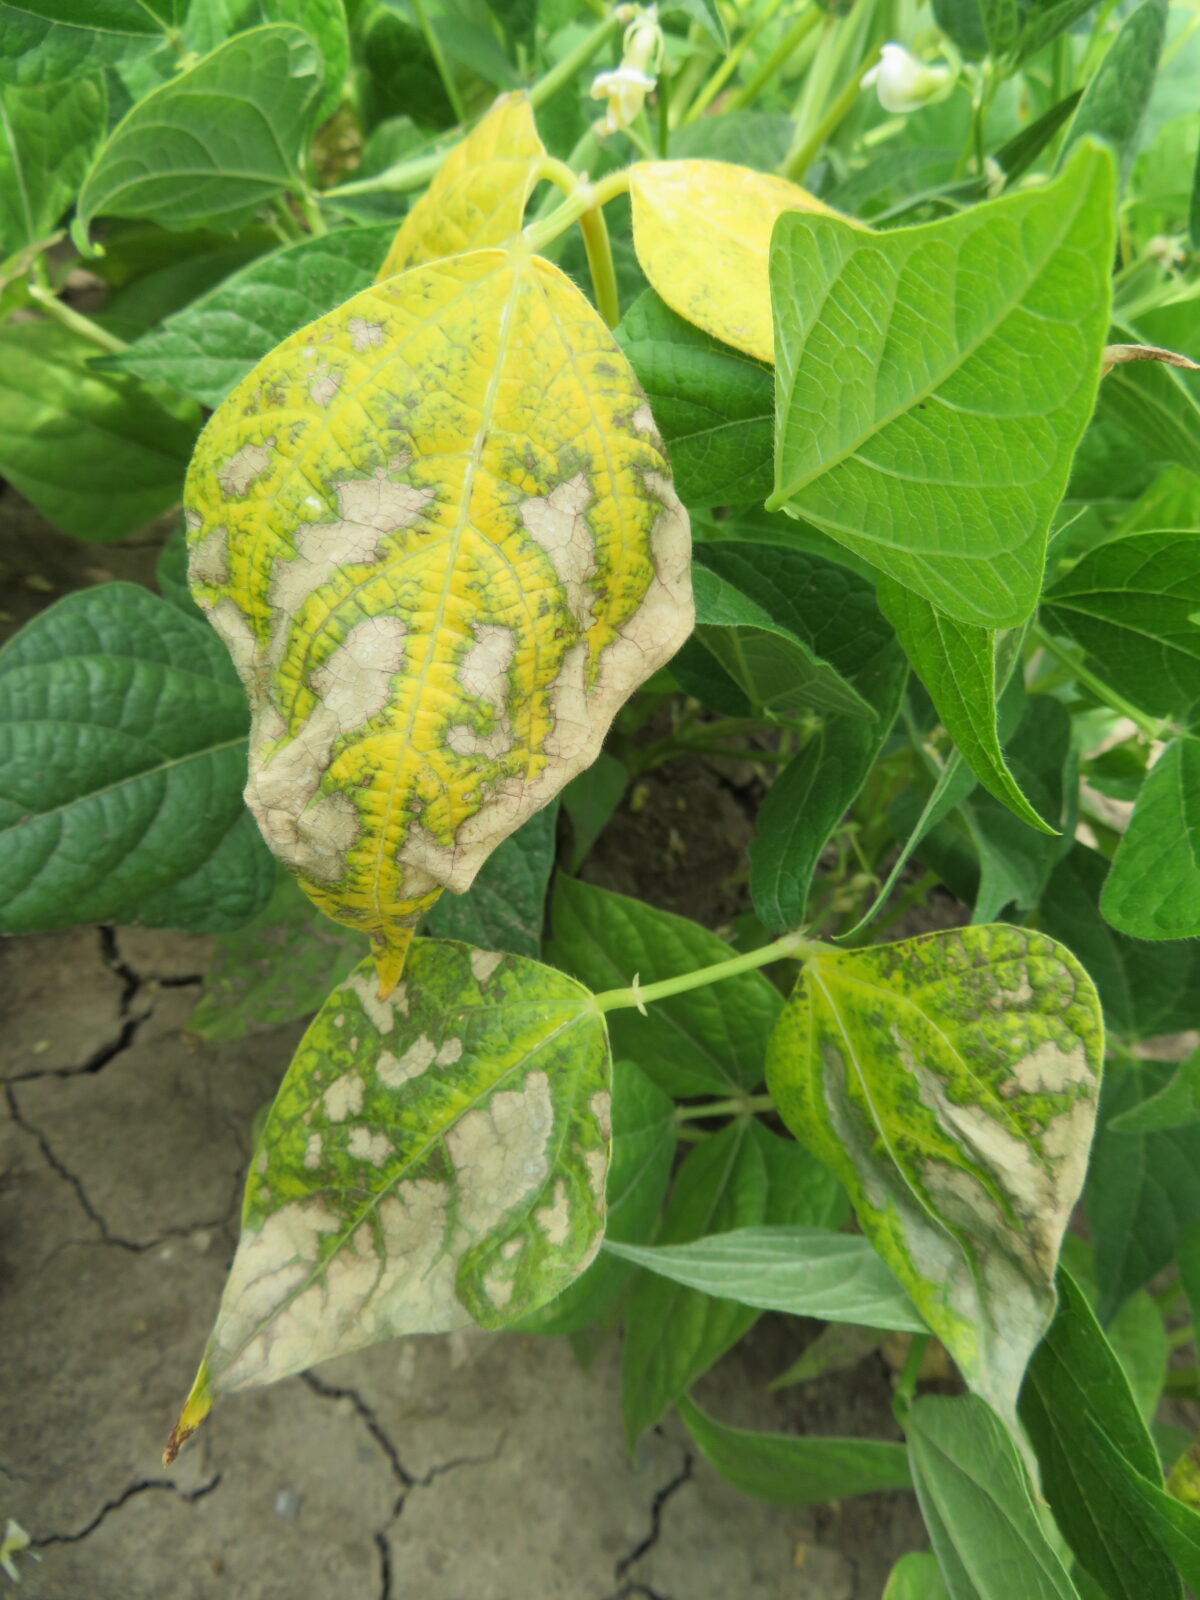 Bacterial wilt symptoms of several dry bean leaves in which there are patches of necrotic areas surrounded by yellow across the surface of the leaves